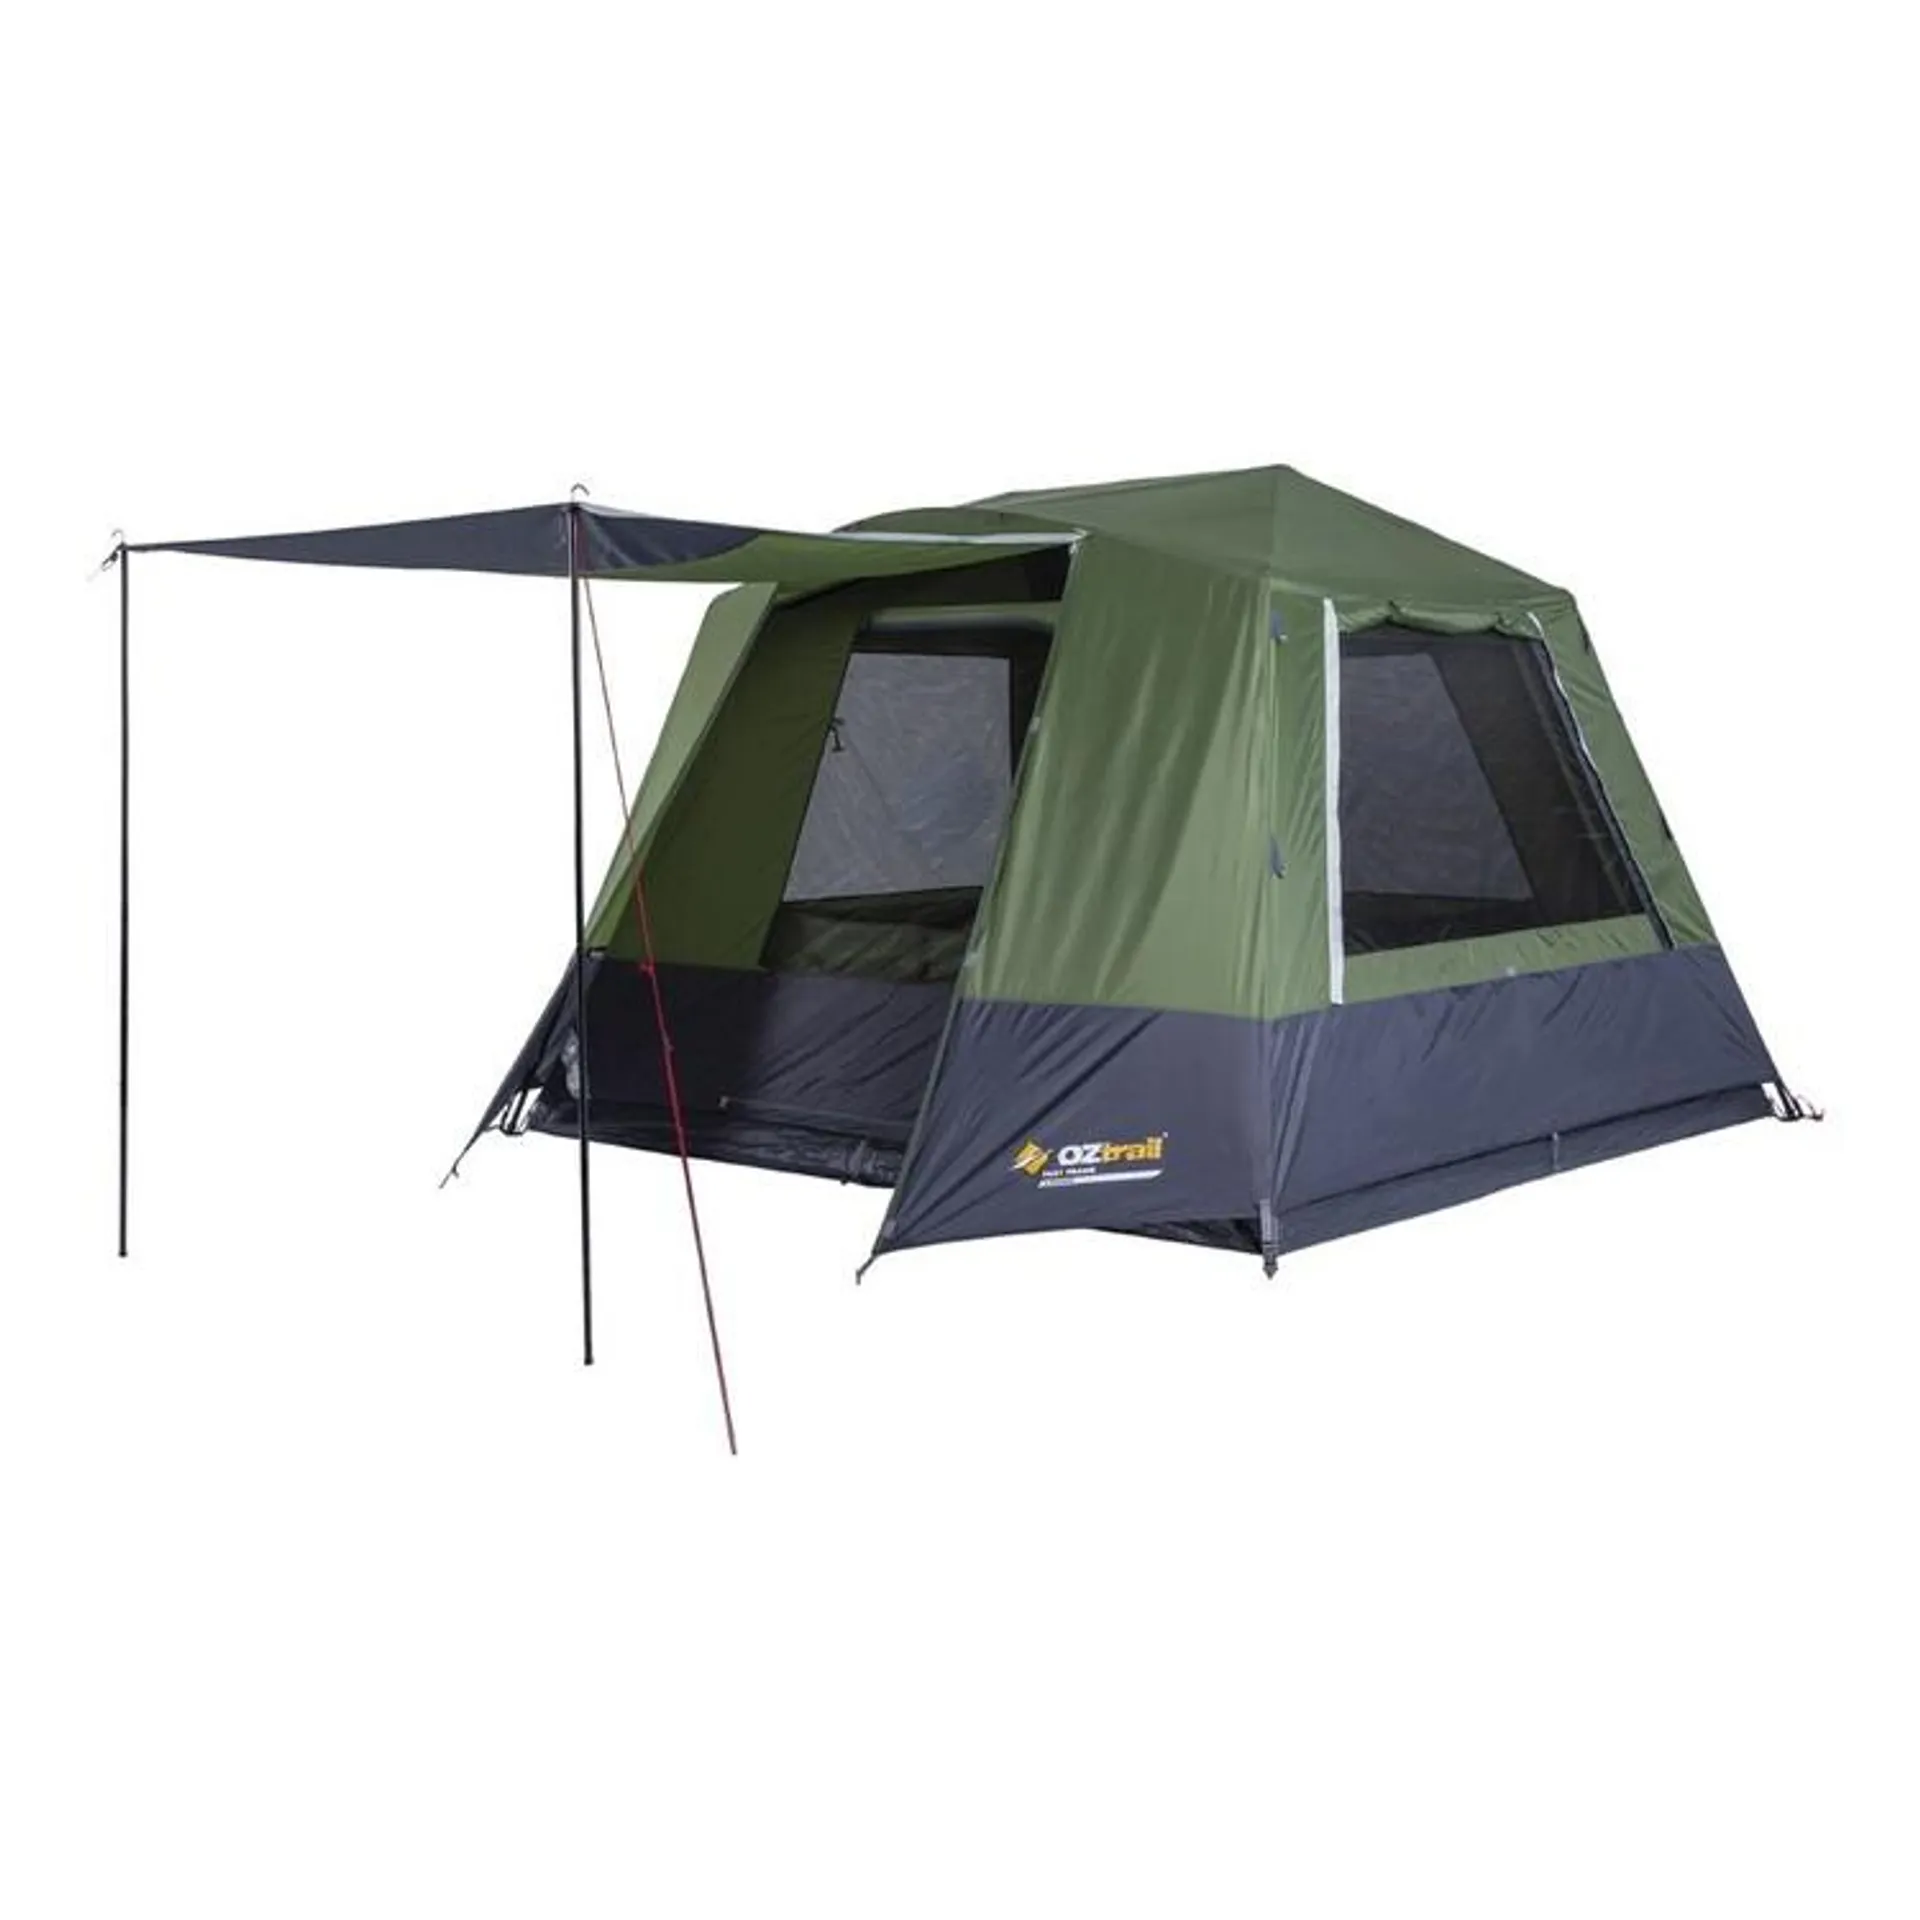 OzTrail 6 Person Fast Frame Tent Green